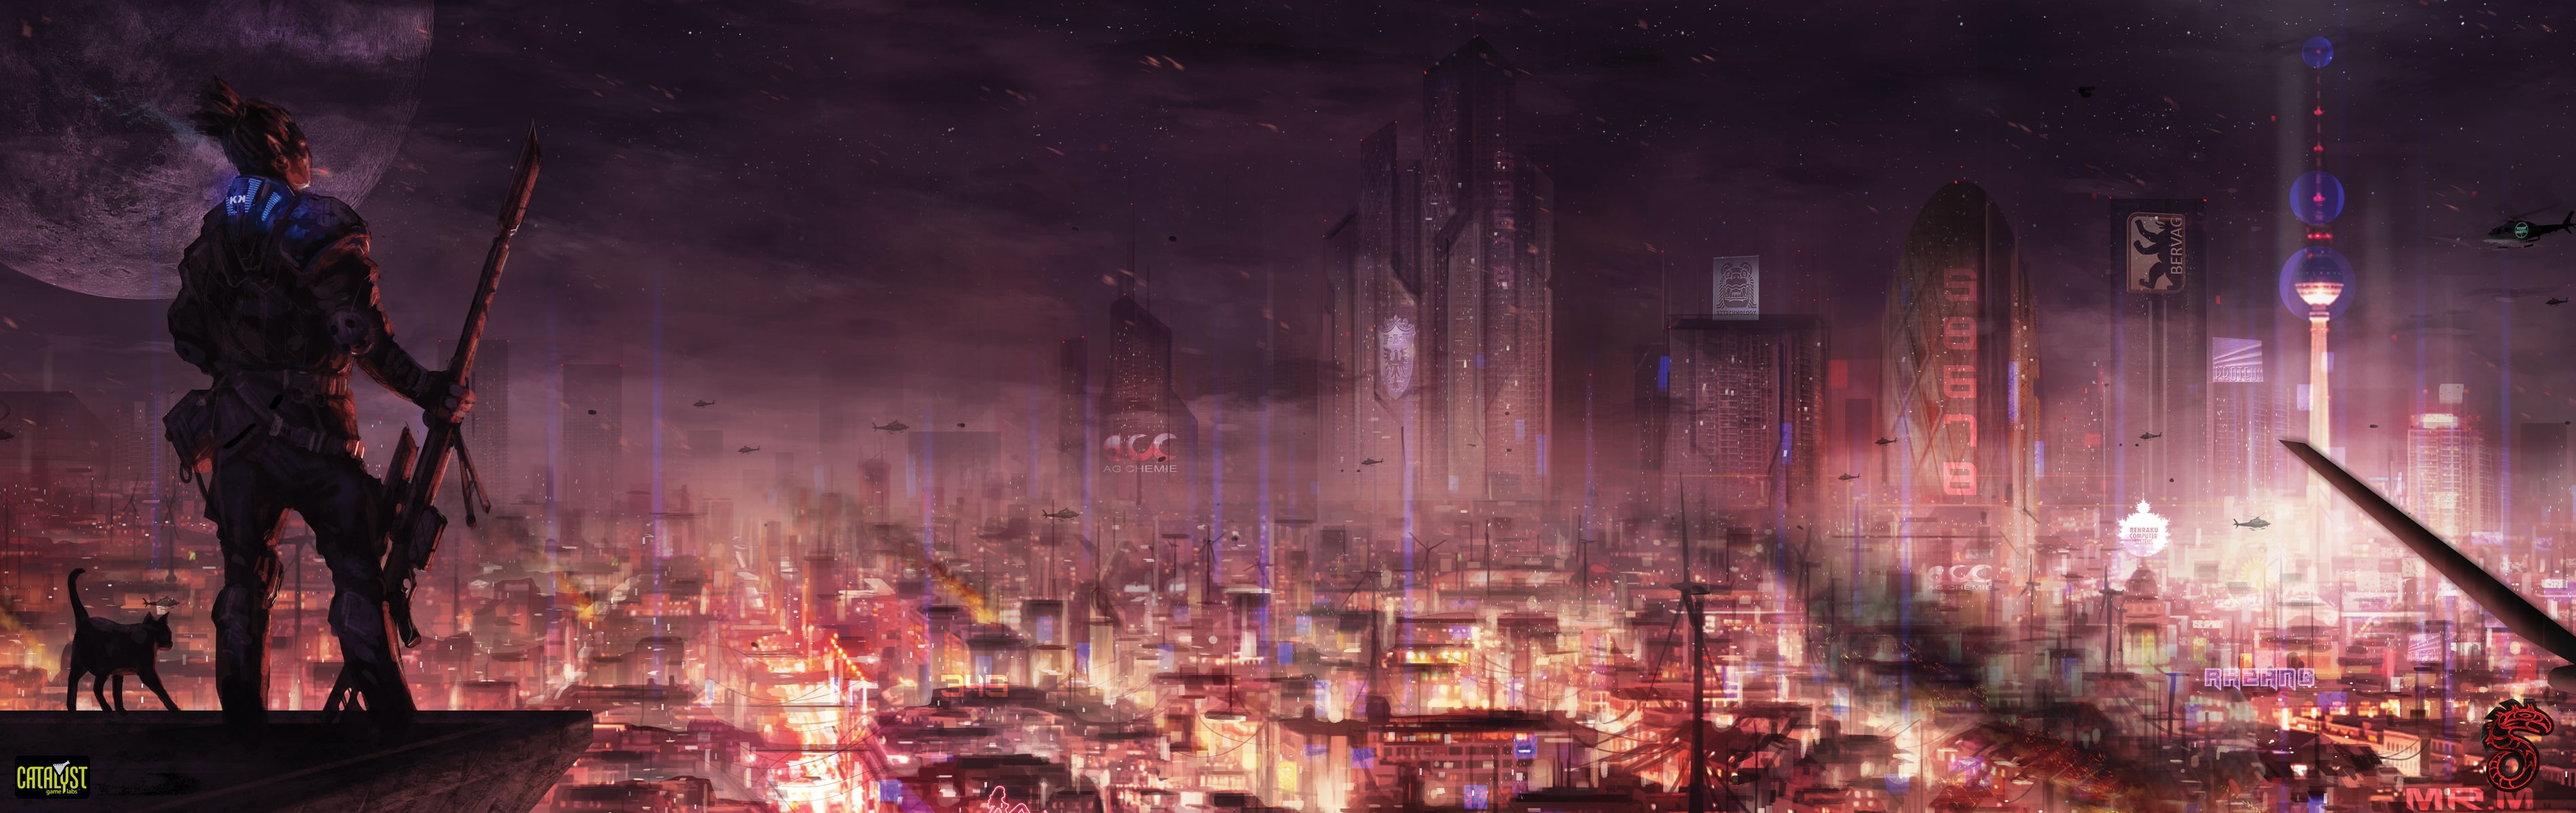 General 3800x1200 Shadowrun cyberpunk futuristic city science fiction cats animals mammals Moon city lights rooftopping rooftops